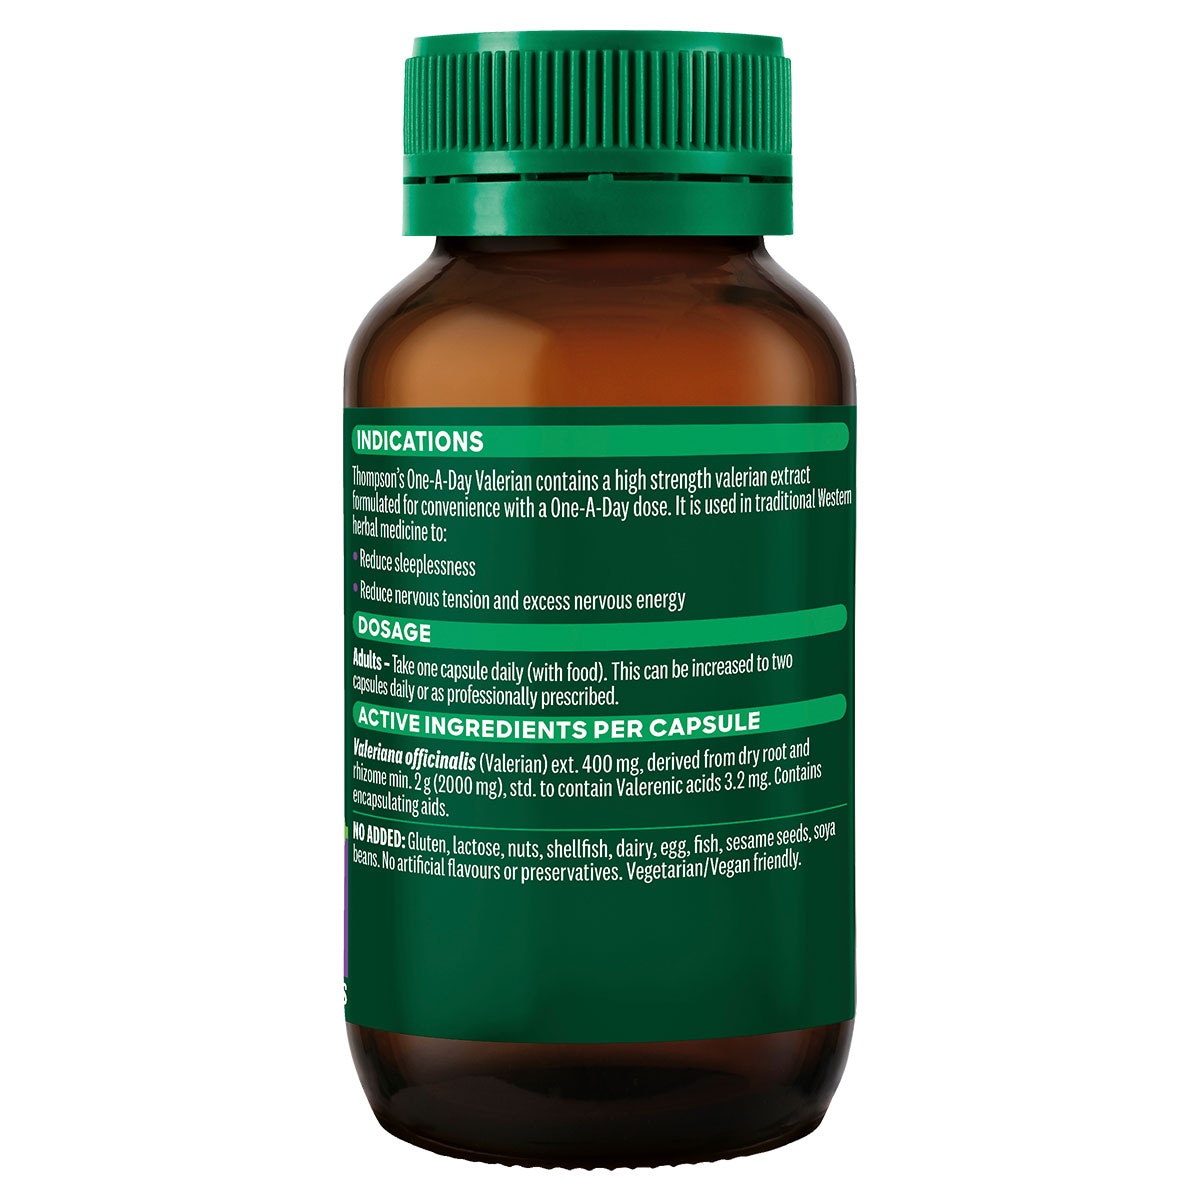 Thompsons One a Day Valerian 60 Capsules